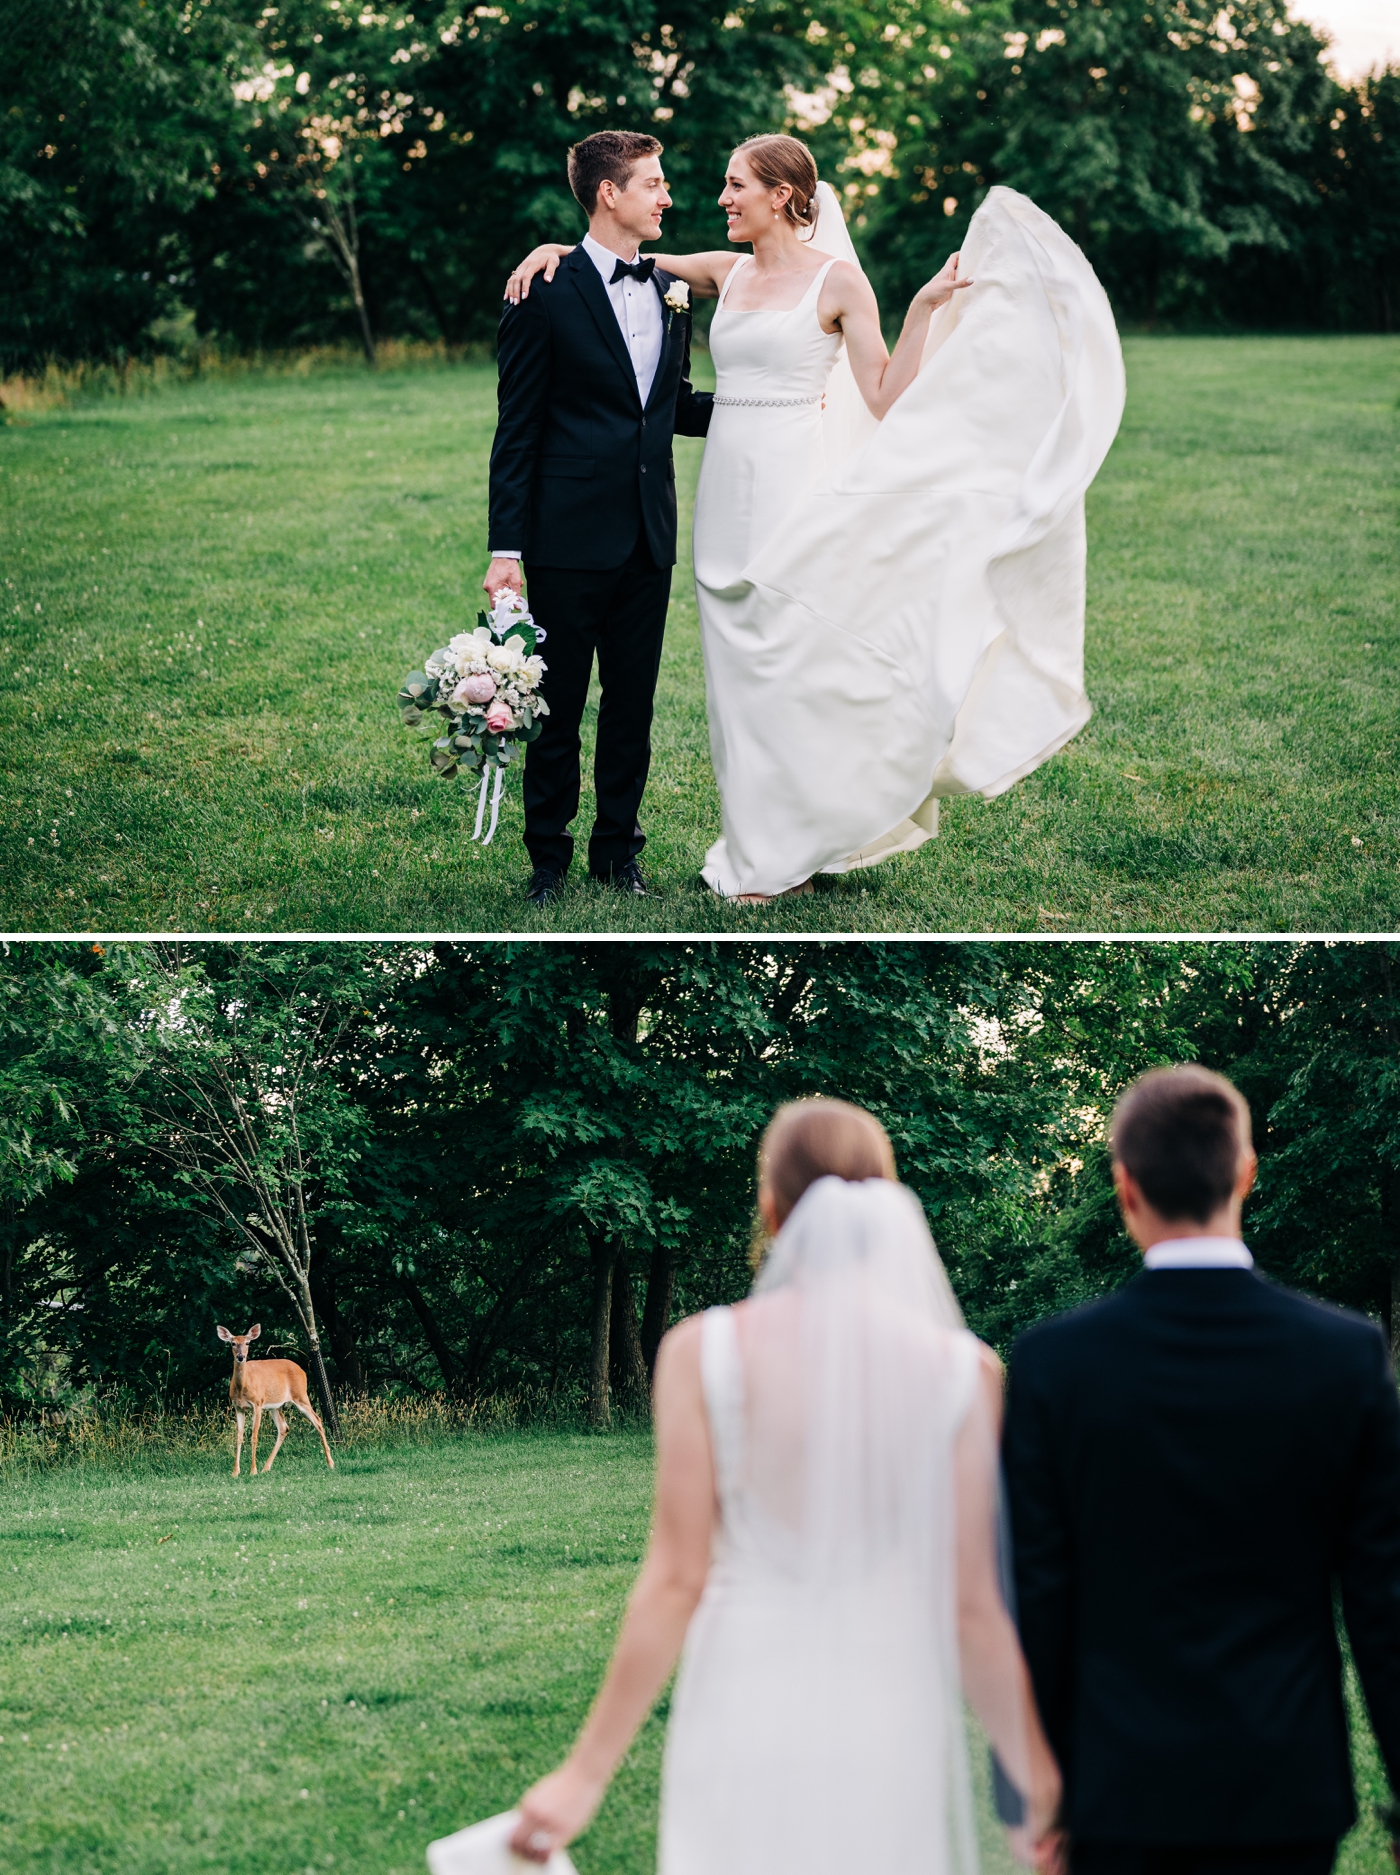 Bride & Groom Portraits at the North Shore of Pittsburgh